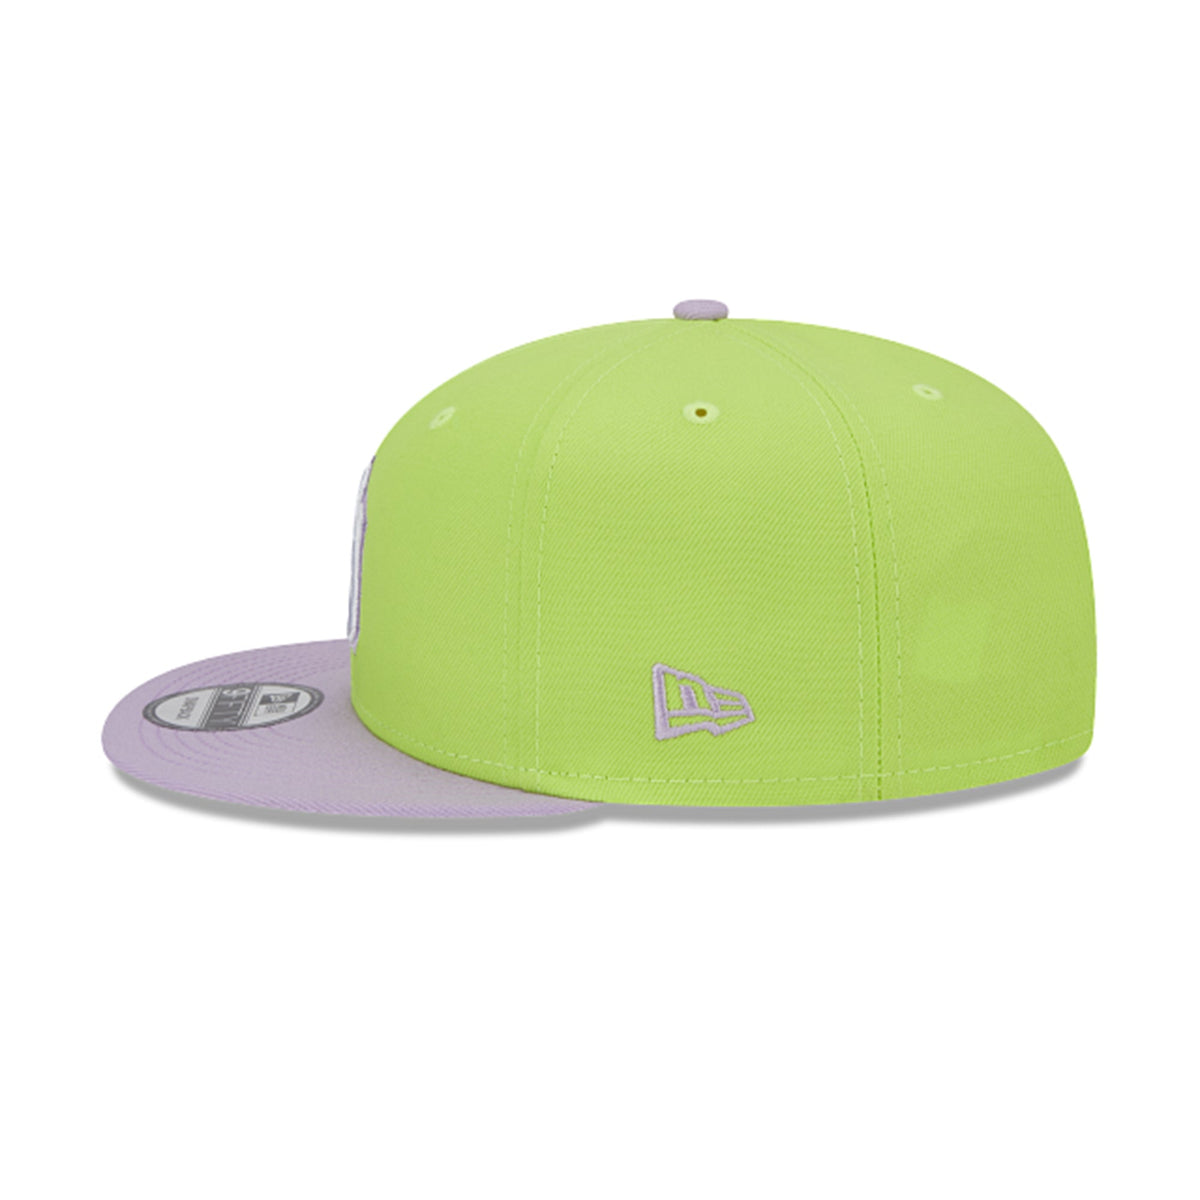 New Era Blank 59FIFTY Fitted Hat - Green